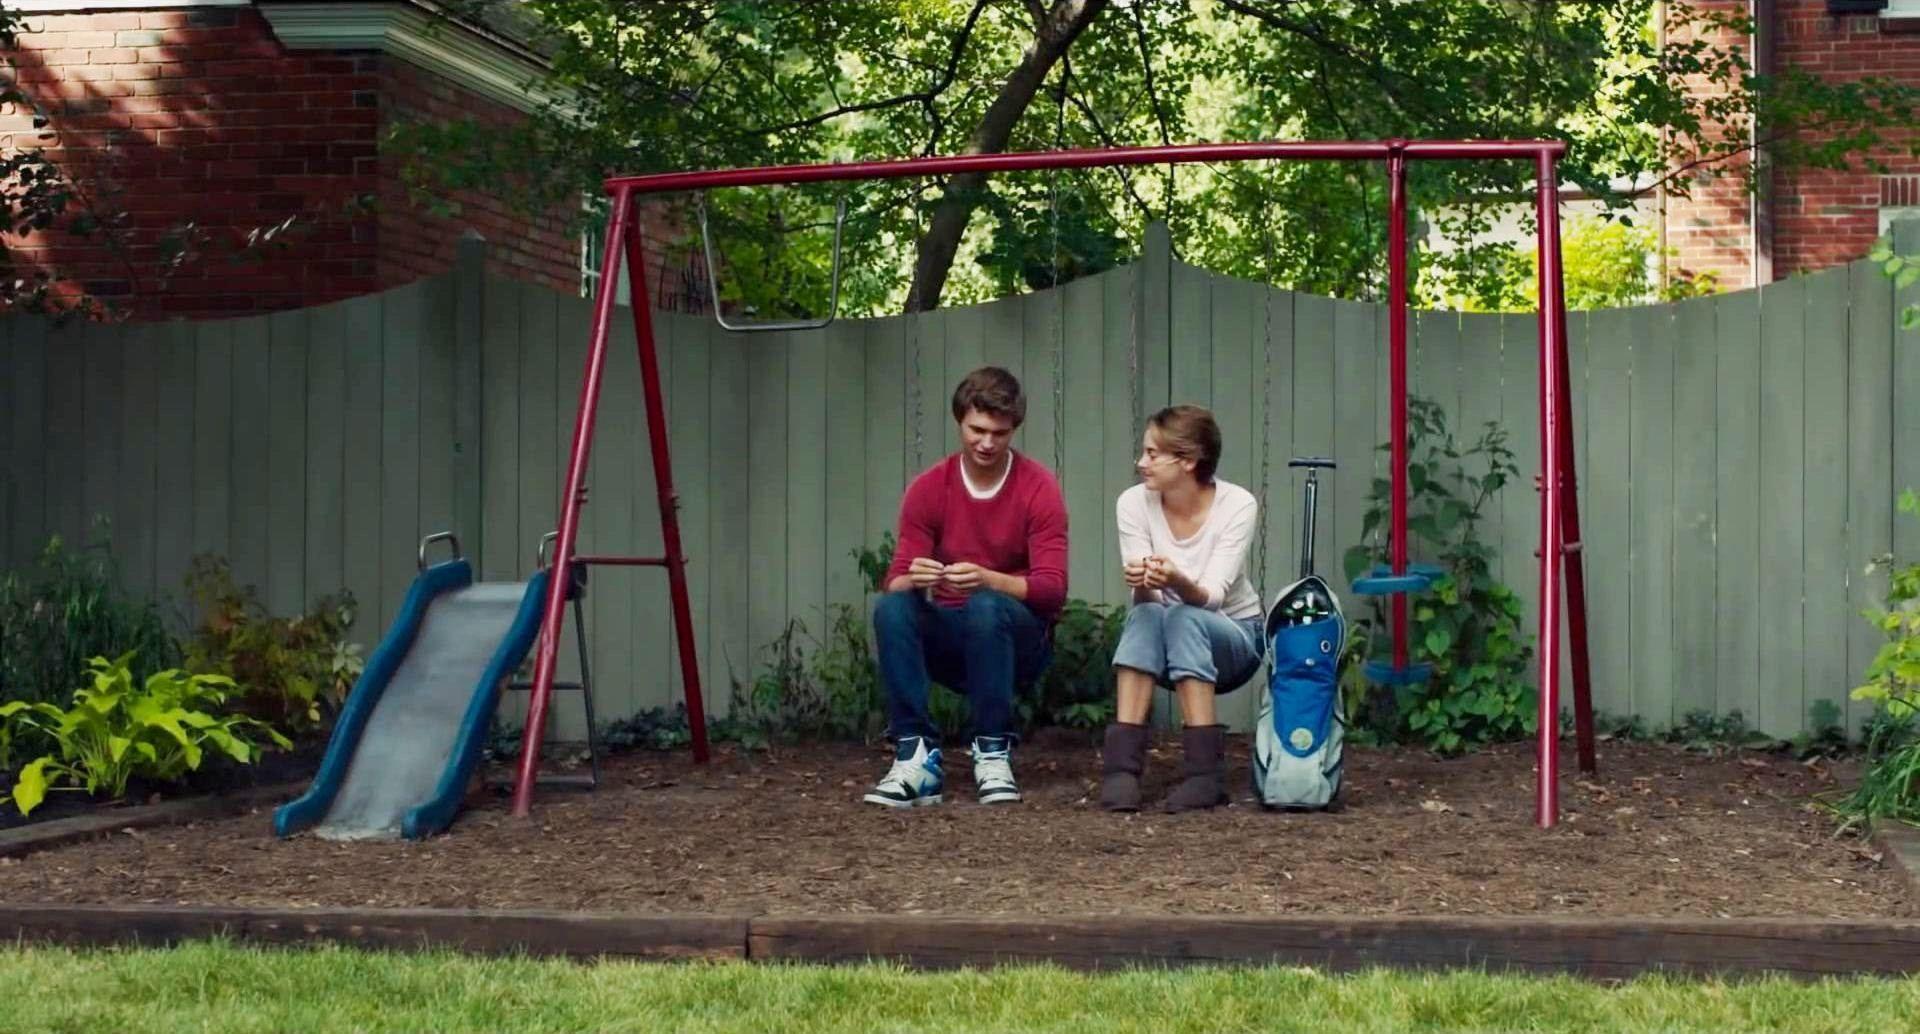 The Fault in Our Stars HD Wallpaper